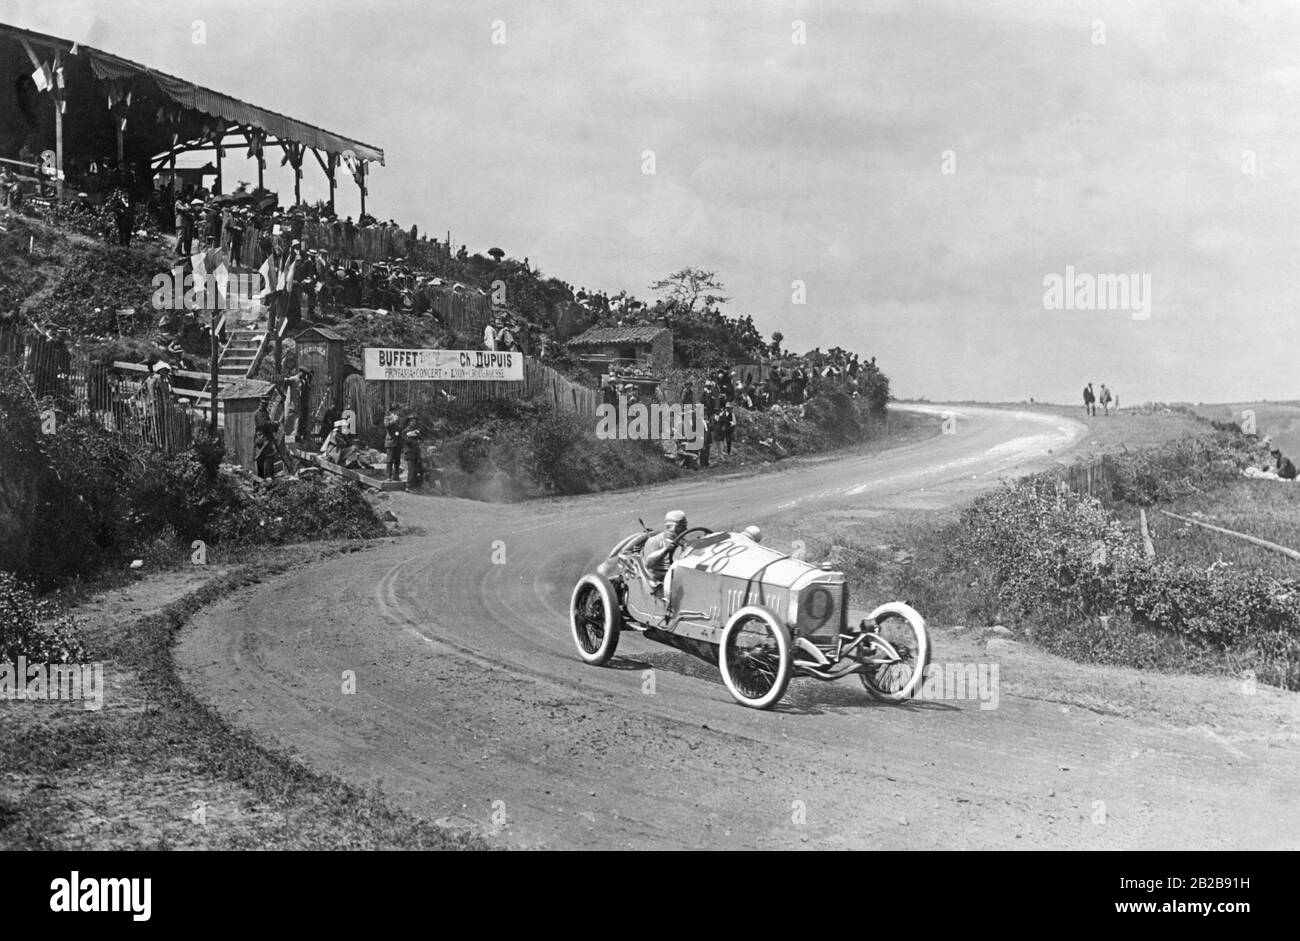 Christian Lautenschlager with his co-driver Hans Rieger in the Mercedes racing car with the number 28 at the French Grand Prix in Lyon. He took 1st place in this race in front of two other Mercedes racing cars. Stock Photo